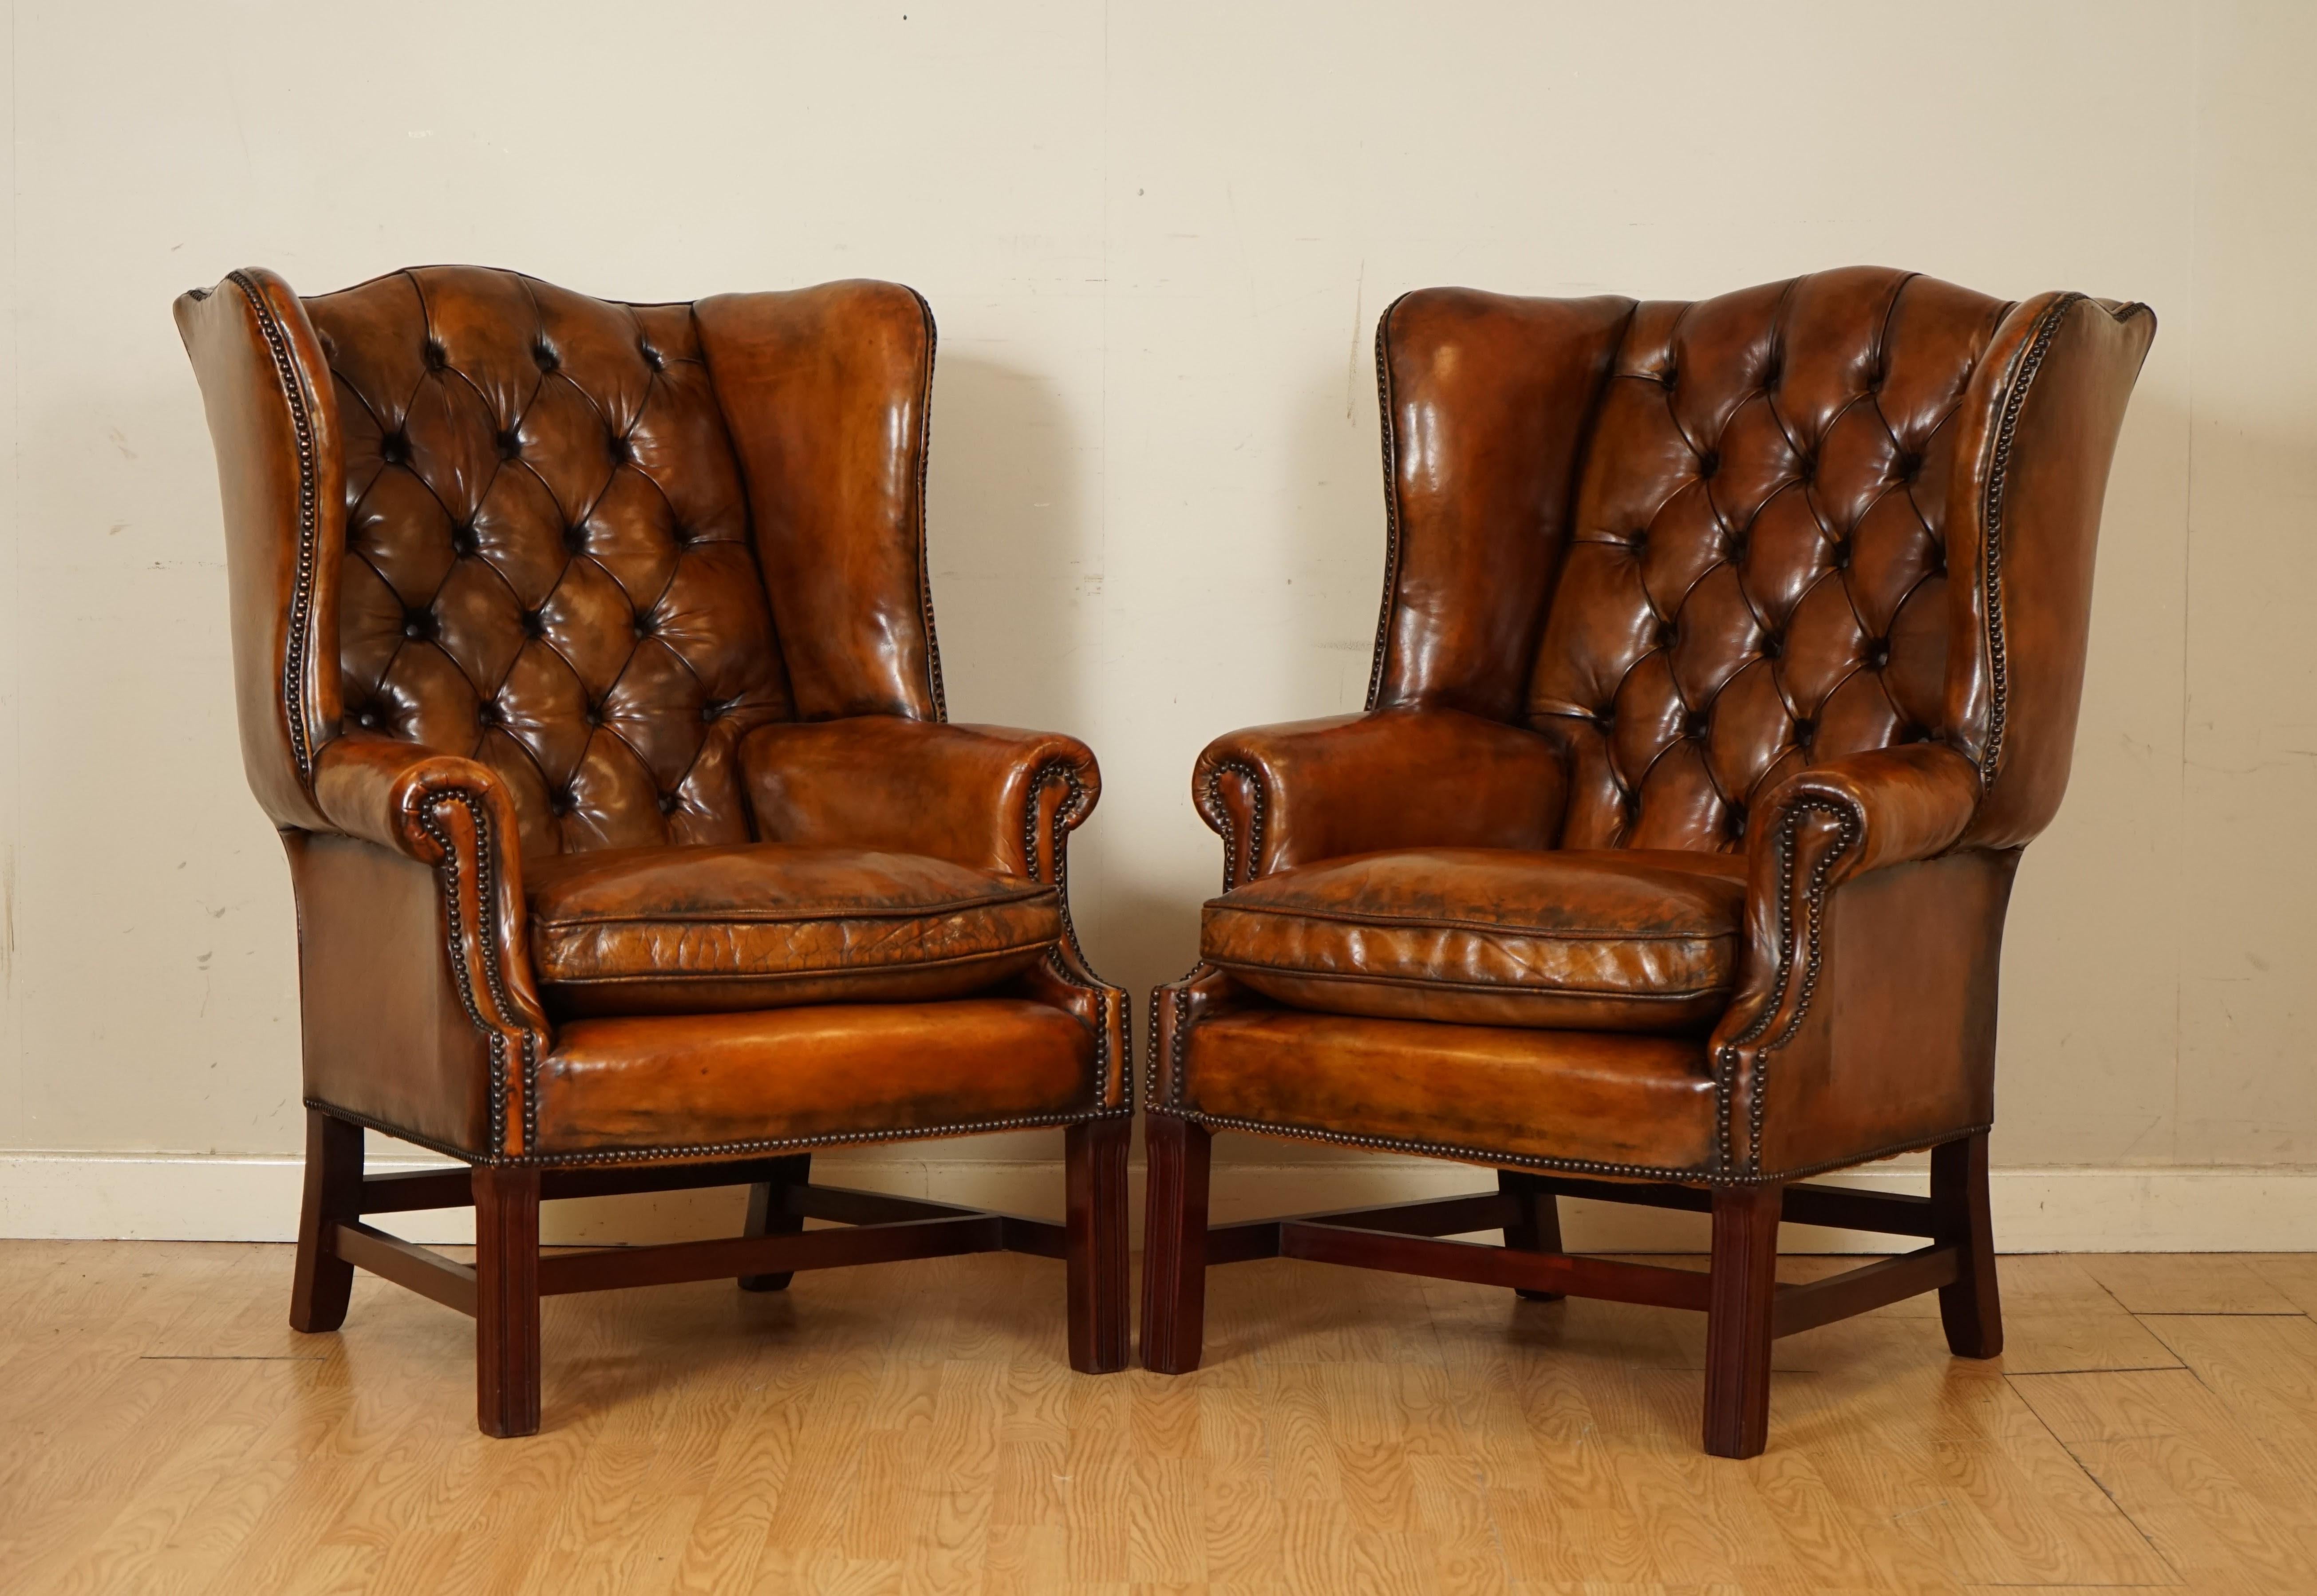 We are delighted to offer for sale these lovely pair of very comfortable feather filled cushion vintage wingback chairs.

A good looking and comfortable pair of coil-sprung vintage wingback armchairs, with feather filled seats. These are good